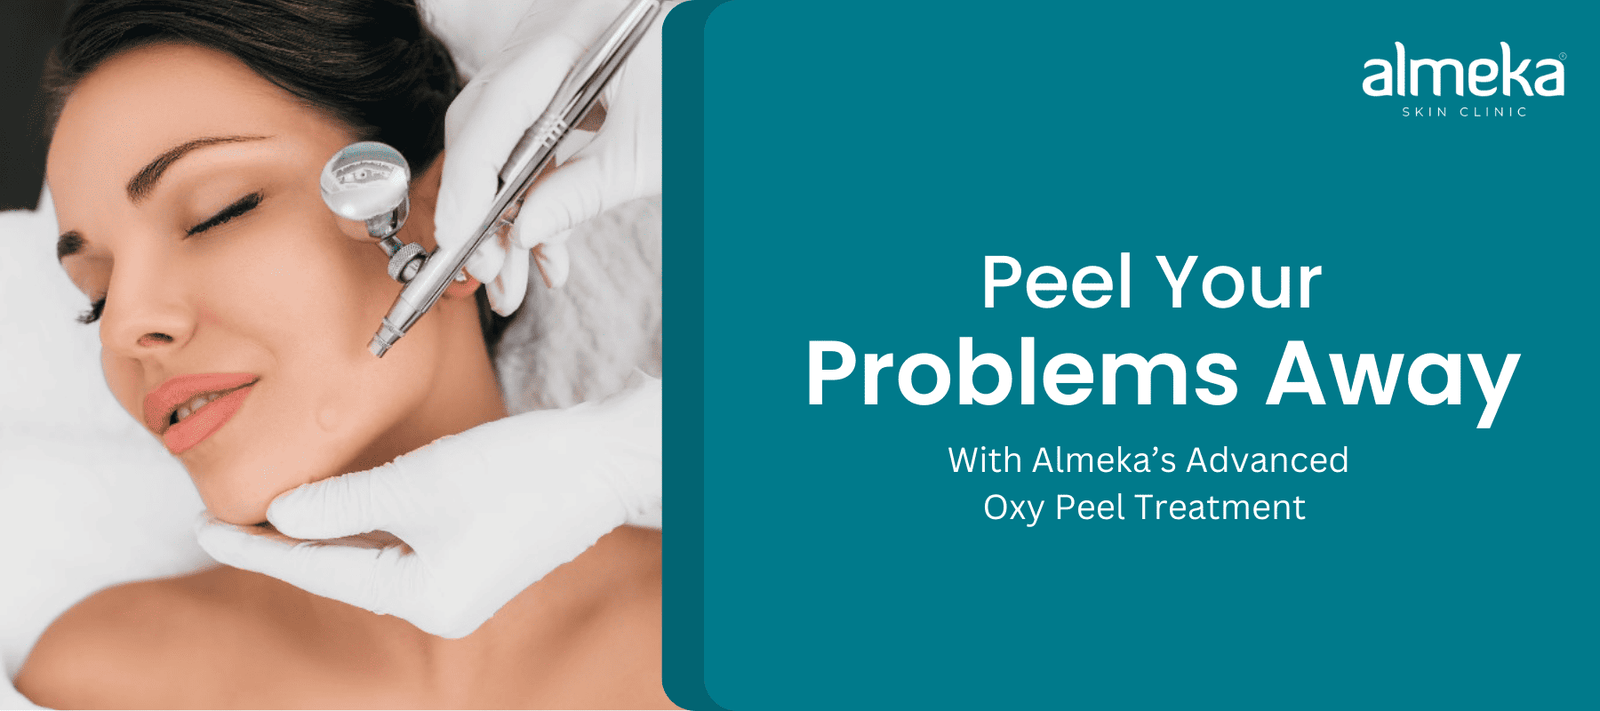 Let the Oxy Peel Treatment, calm your worries